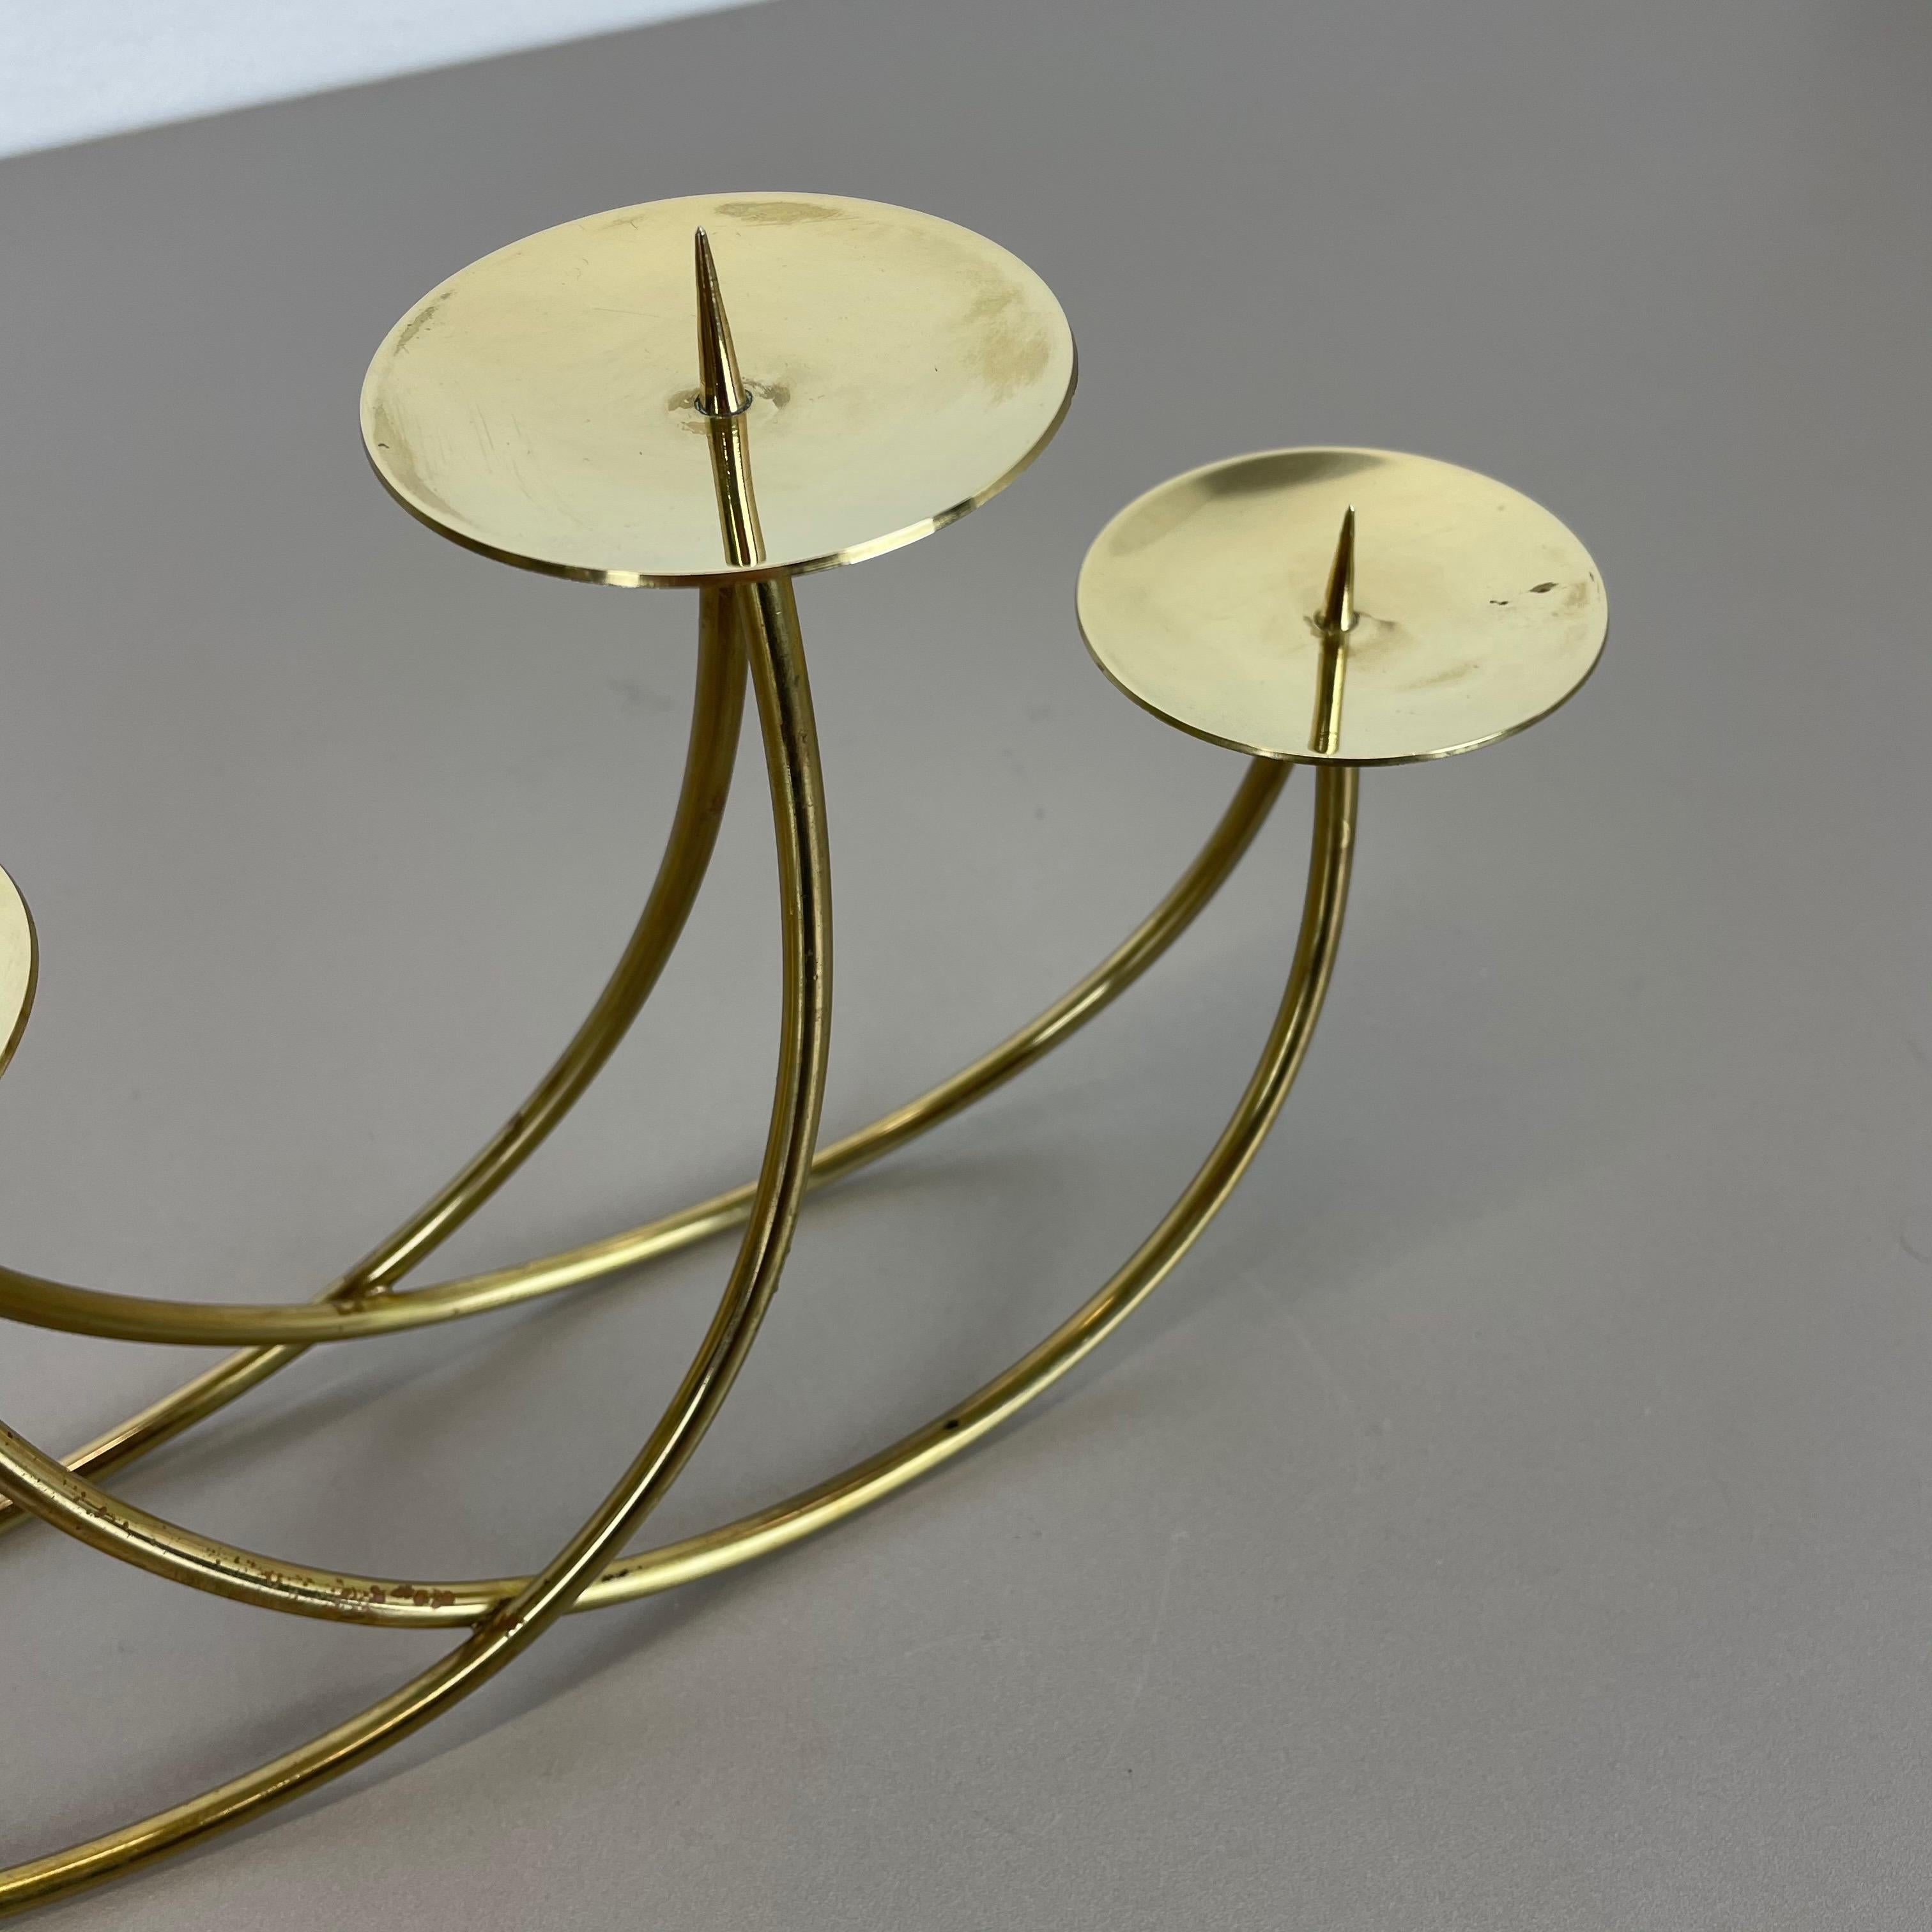 Sculptural Solid Brass Candleholder by Harald Buchrucker Bauhaus, Germany, 1950s For Sale 5